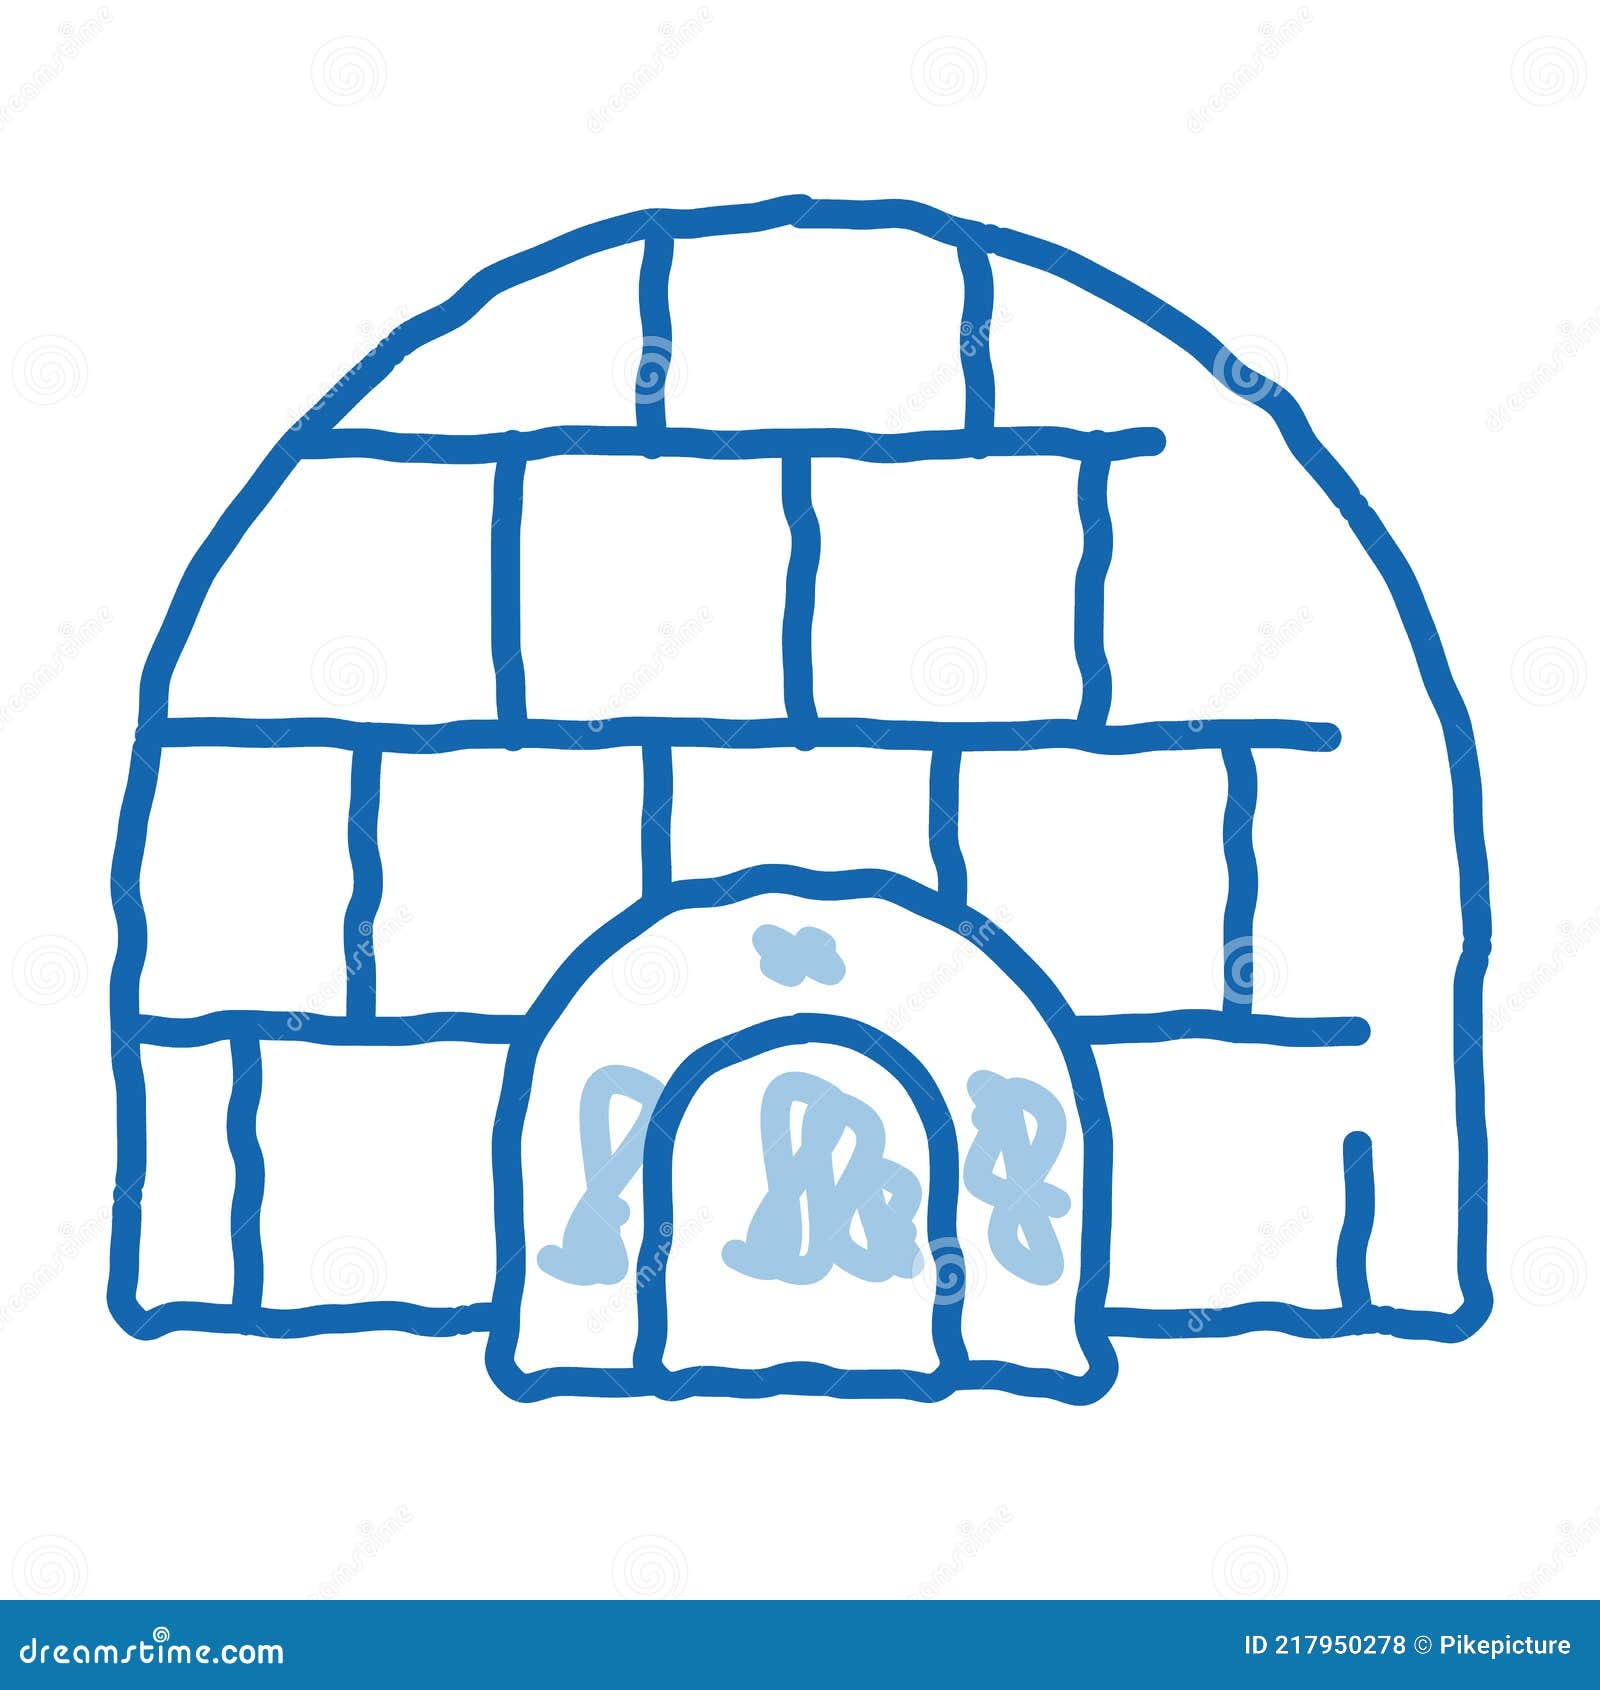 How to draw an igloo - Shoo Rayner Children's Author & Illustrator